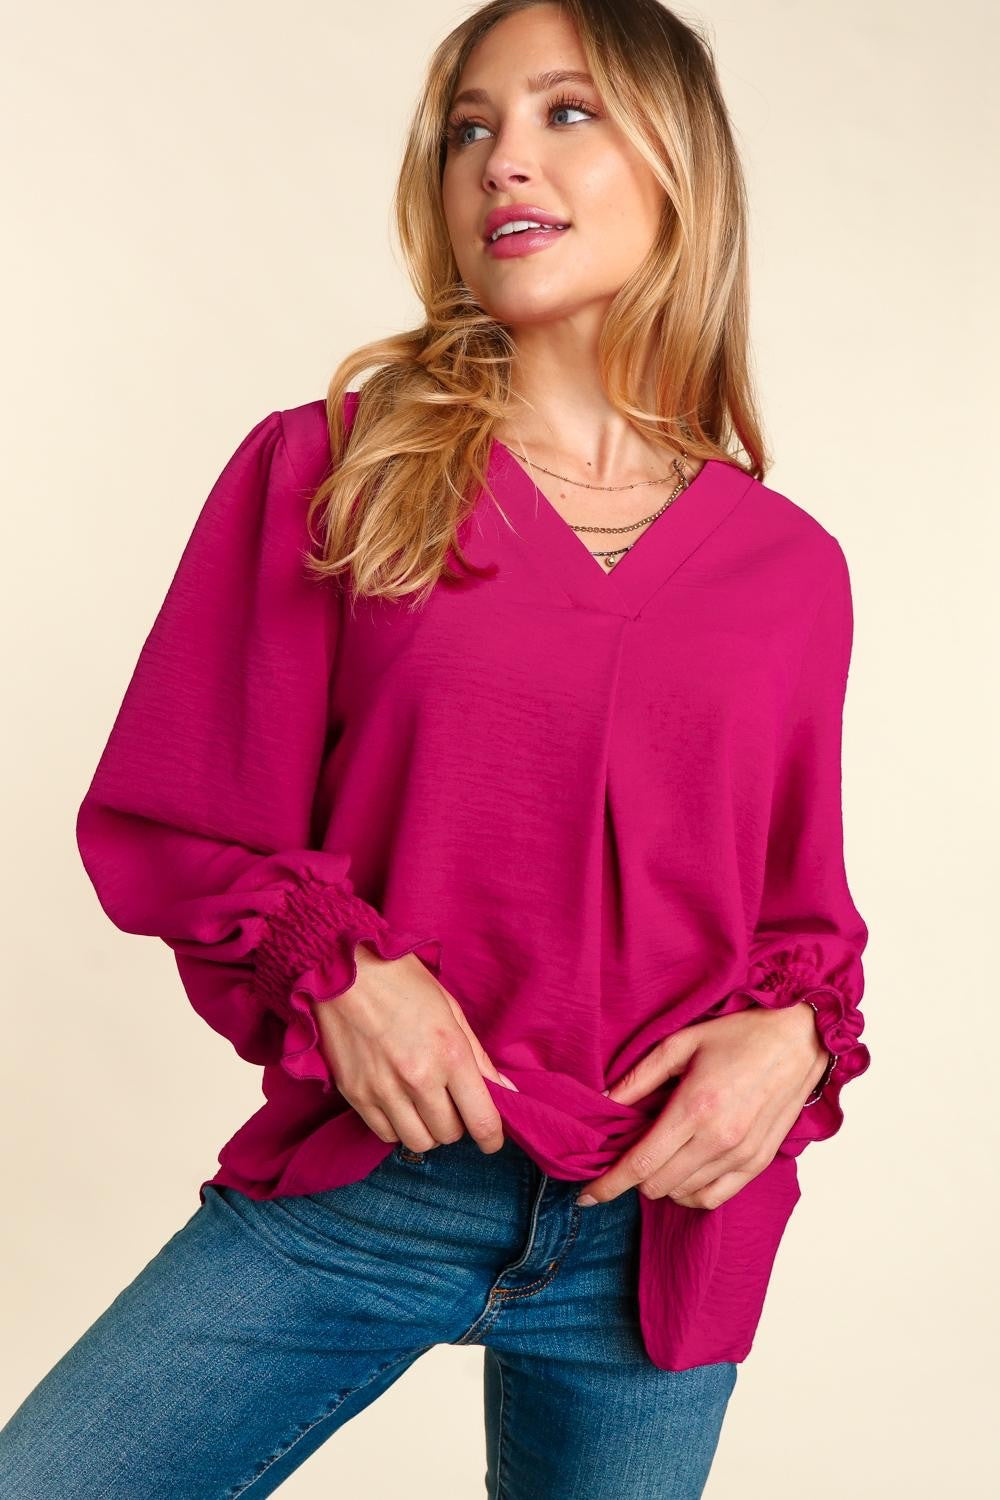 Sam V-neck Banded Tuck Smocked Top, Magenta-Long Sleeve Tops-Inspired by Justeen-Women's Clothing Boutique in Chicago, Illinois